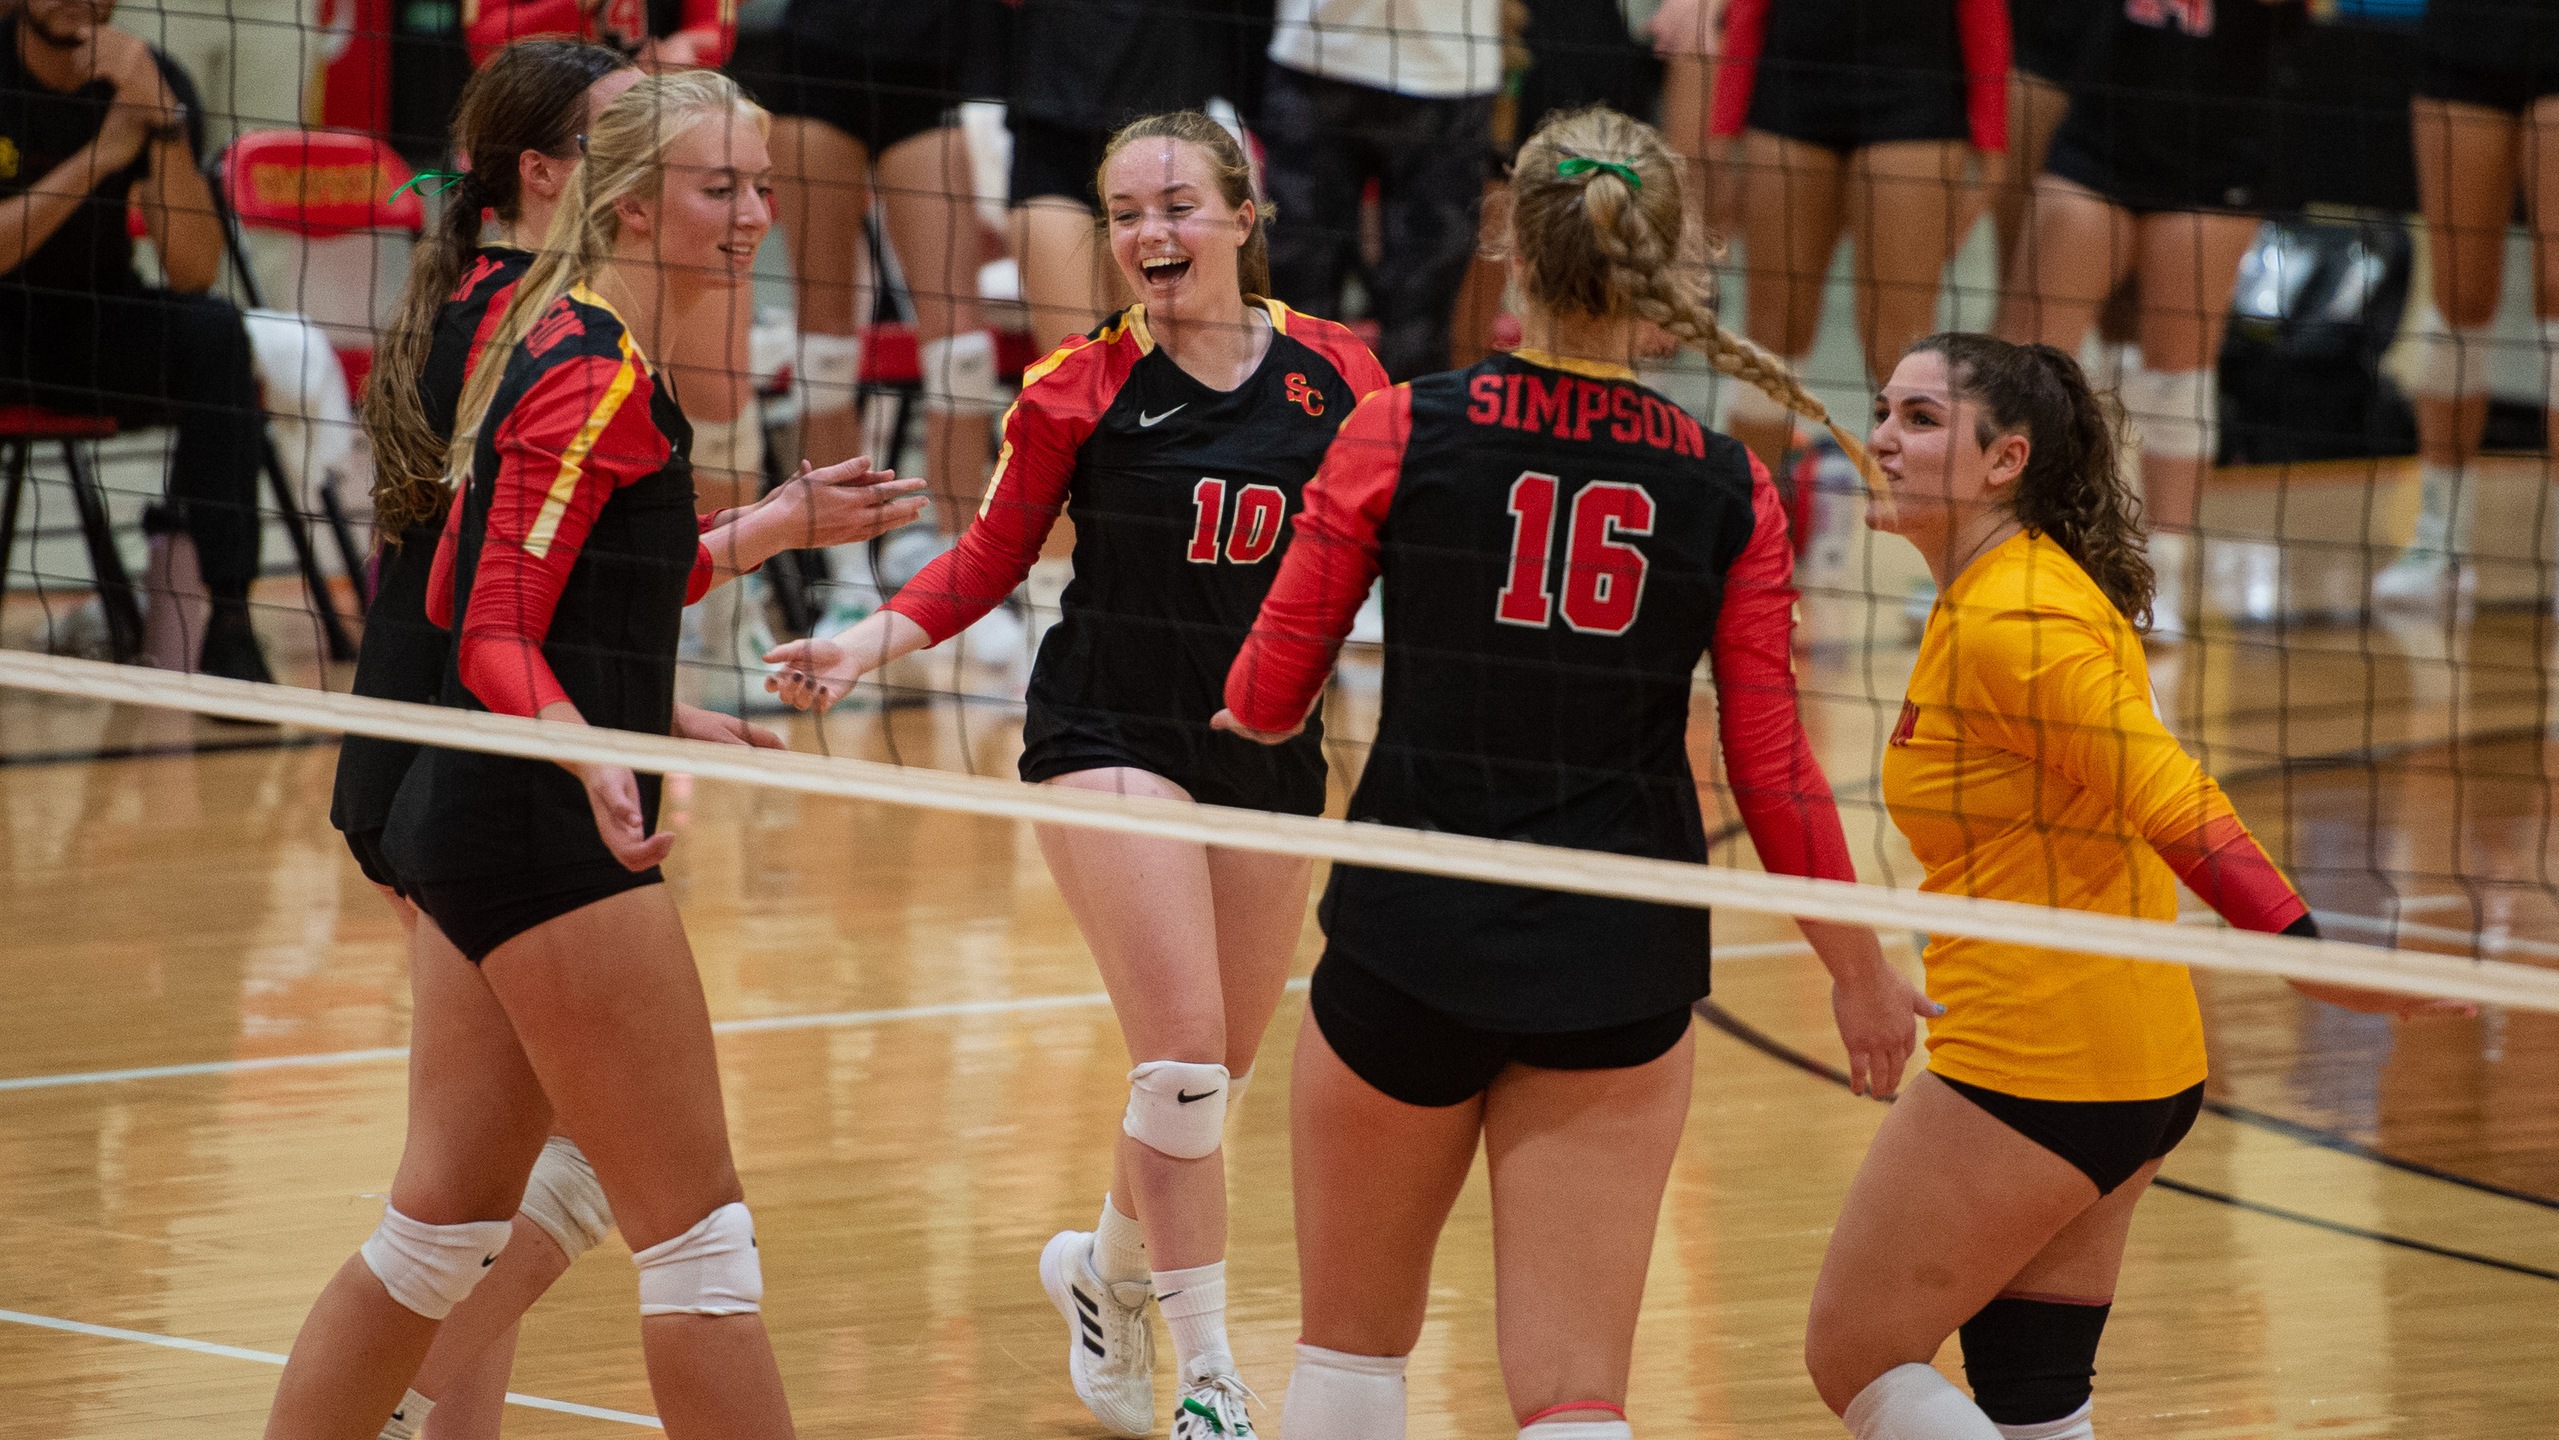 Storm record sweep of Luther in home opener